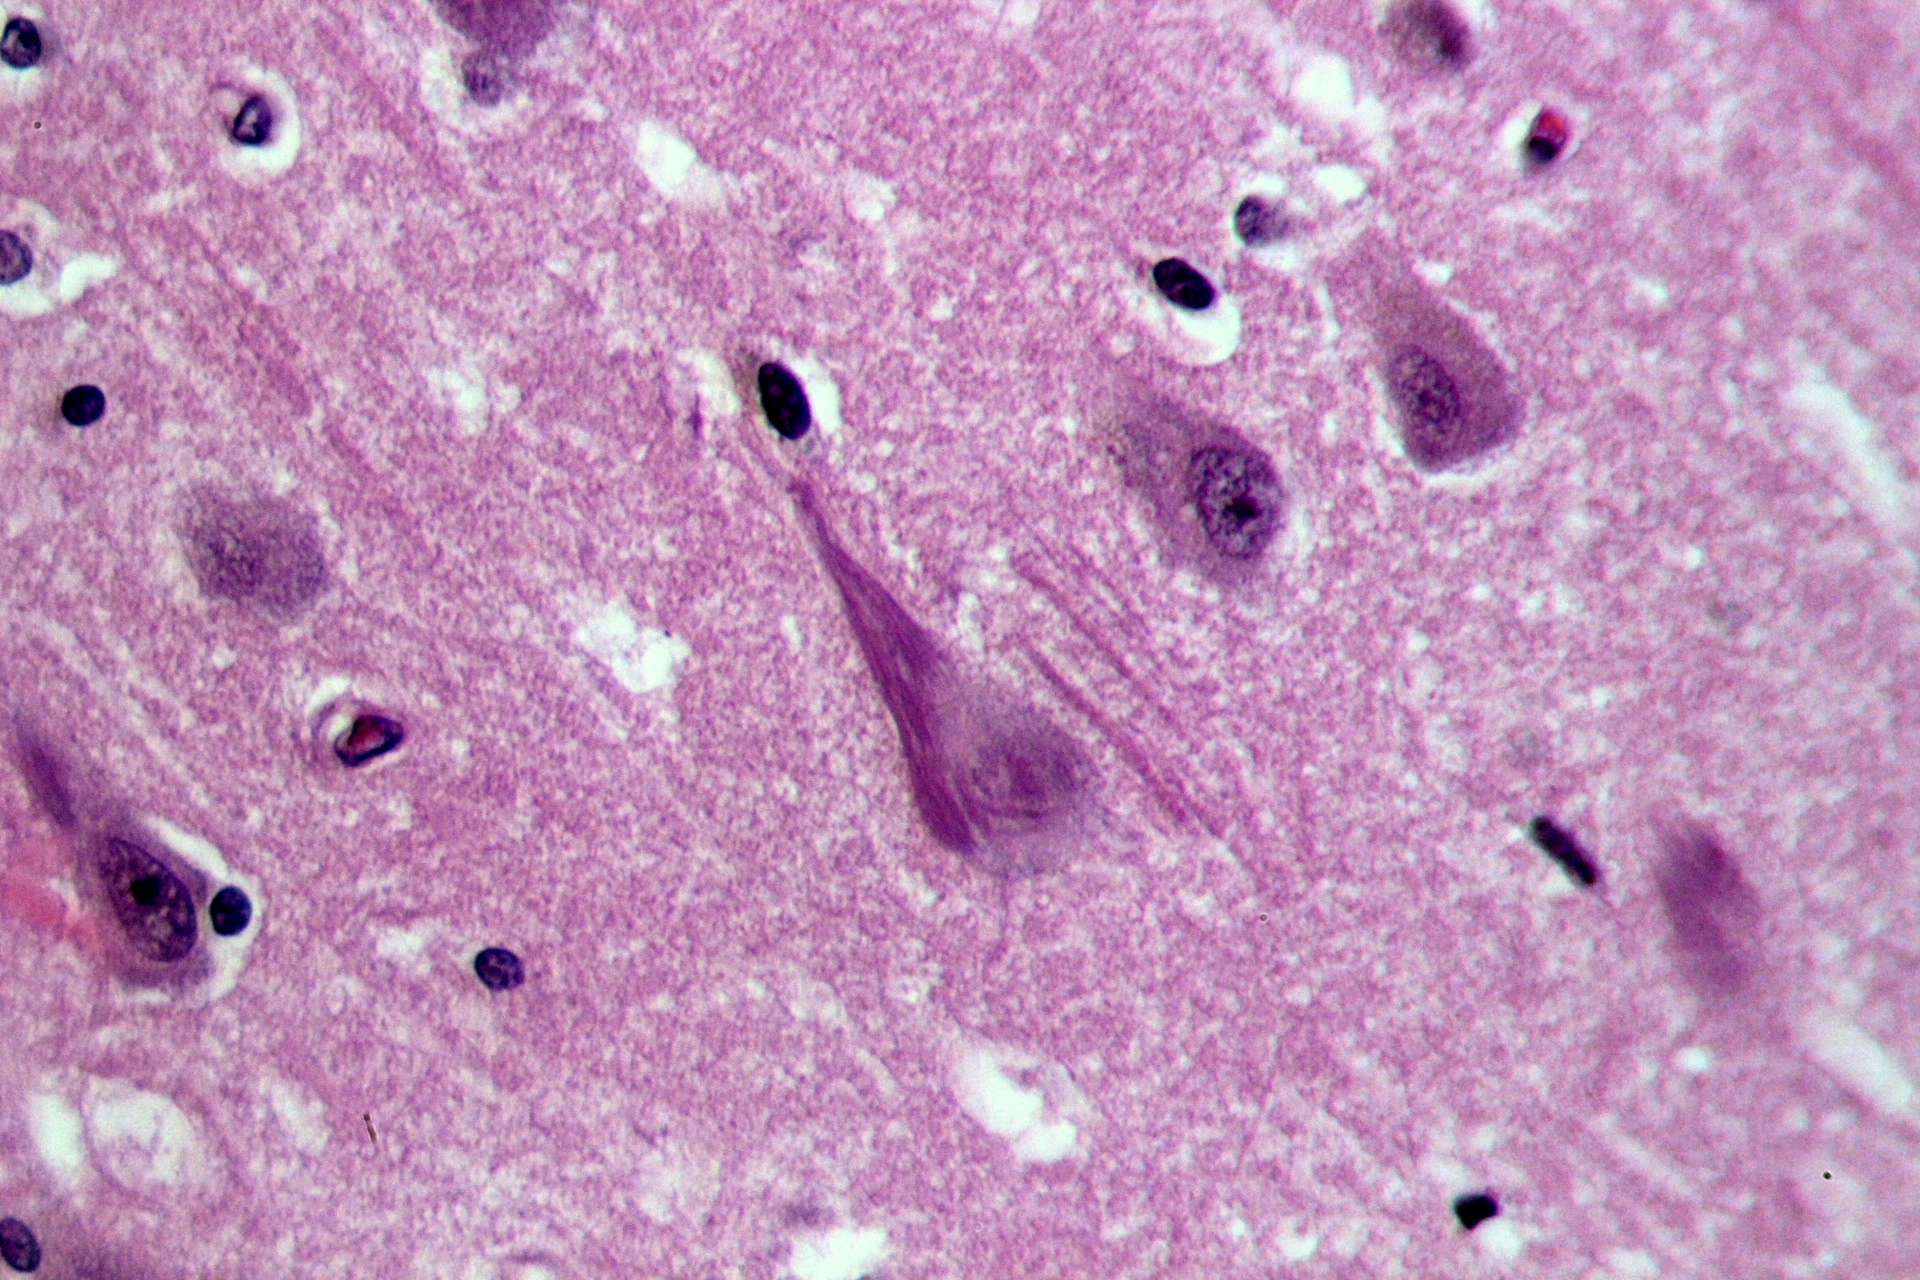 File:Neurofibrillary tangles in the Hippocampus HE 3.JPG